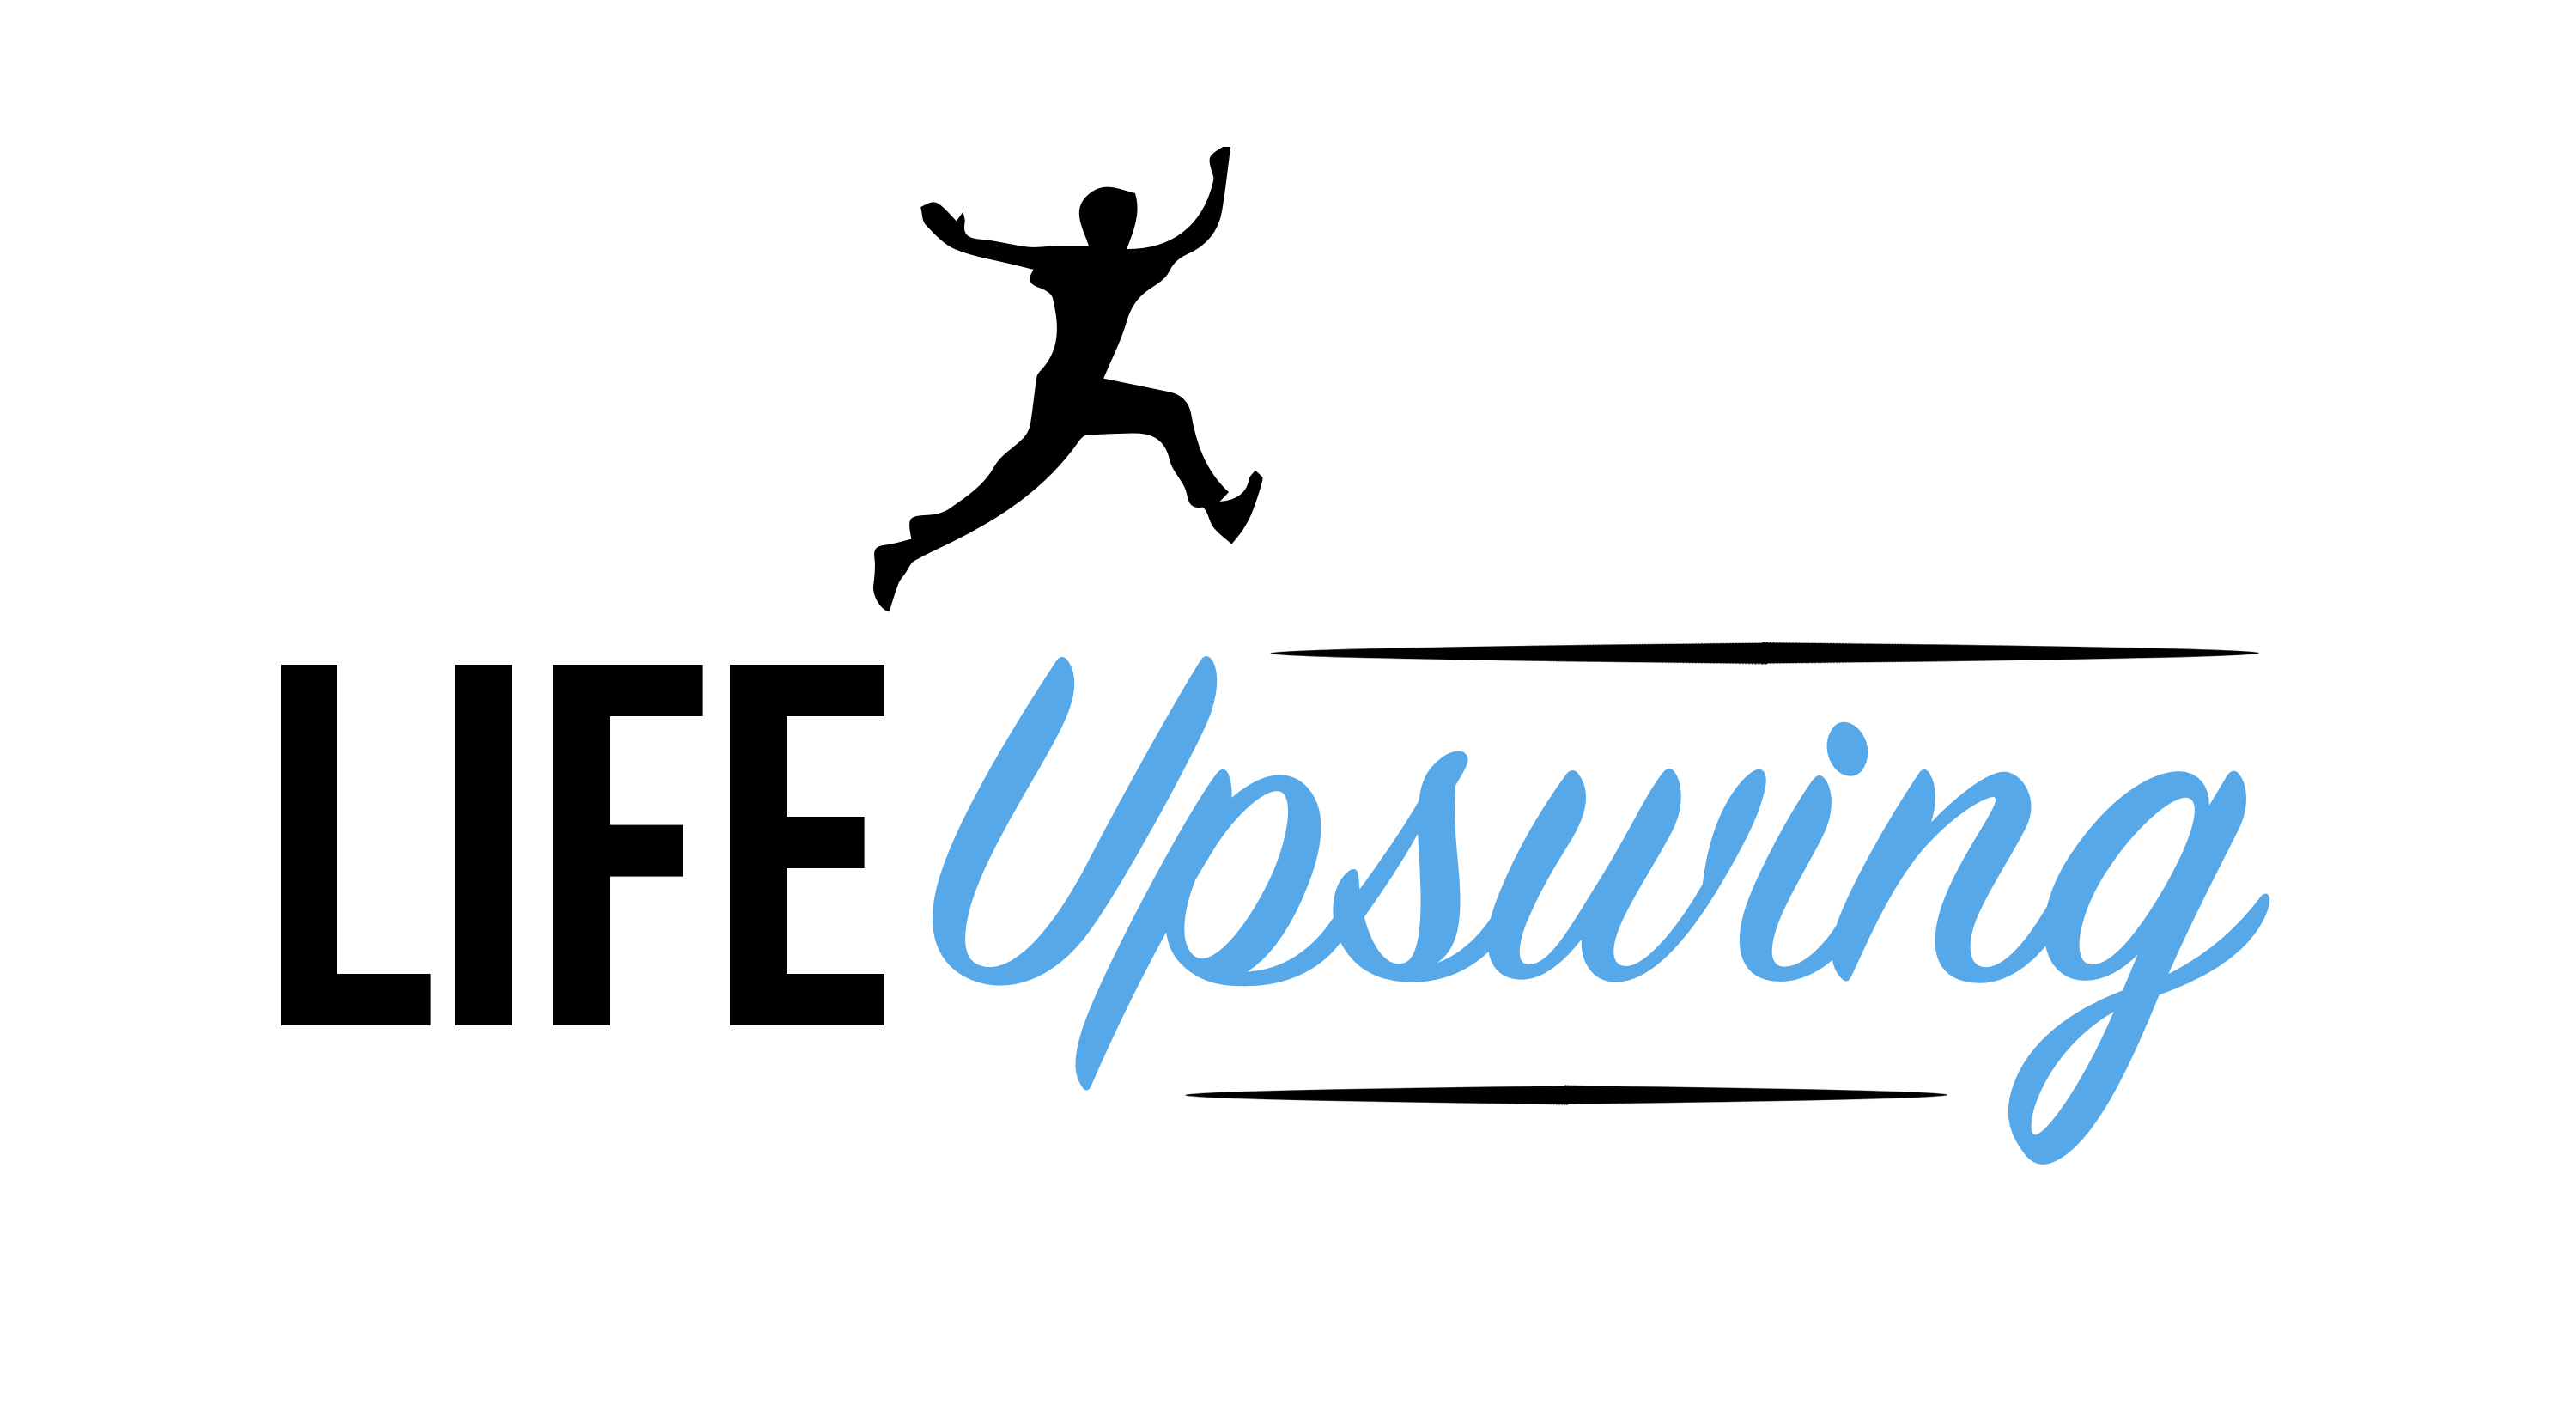 Logo of LifeUpswing Business And Management Consultants In Leominster, West Midlands